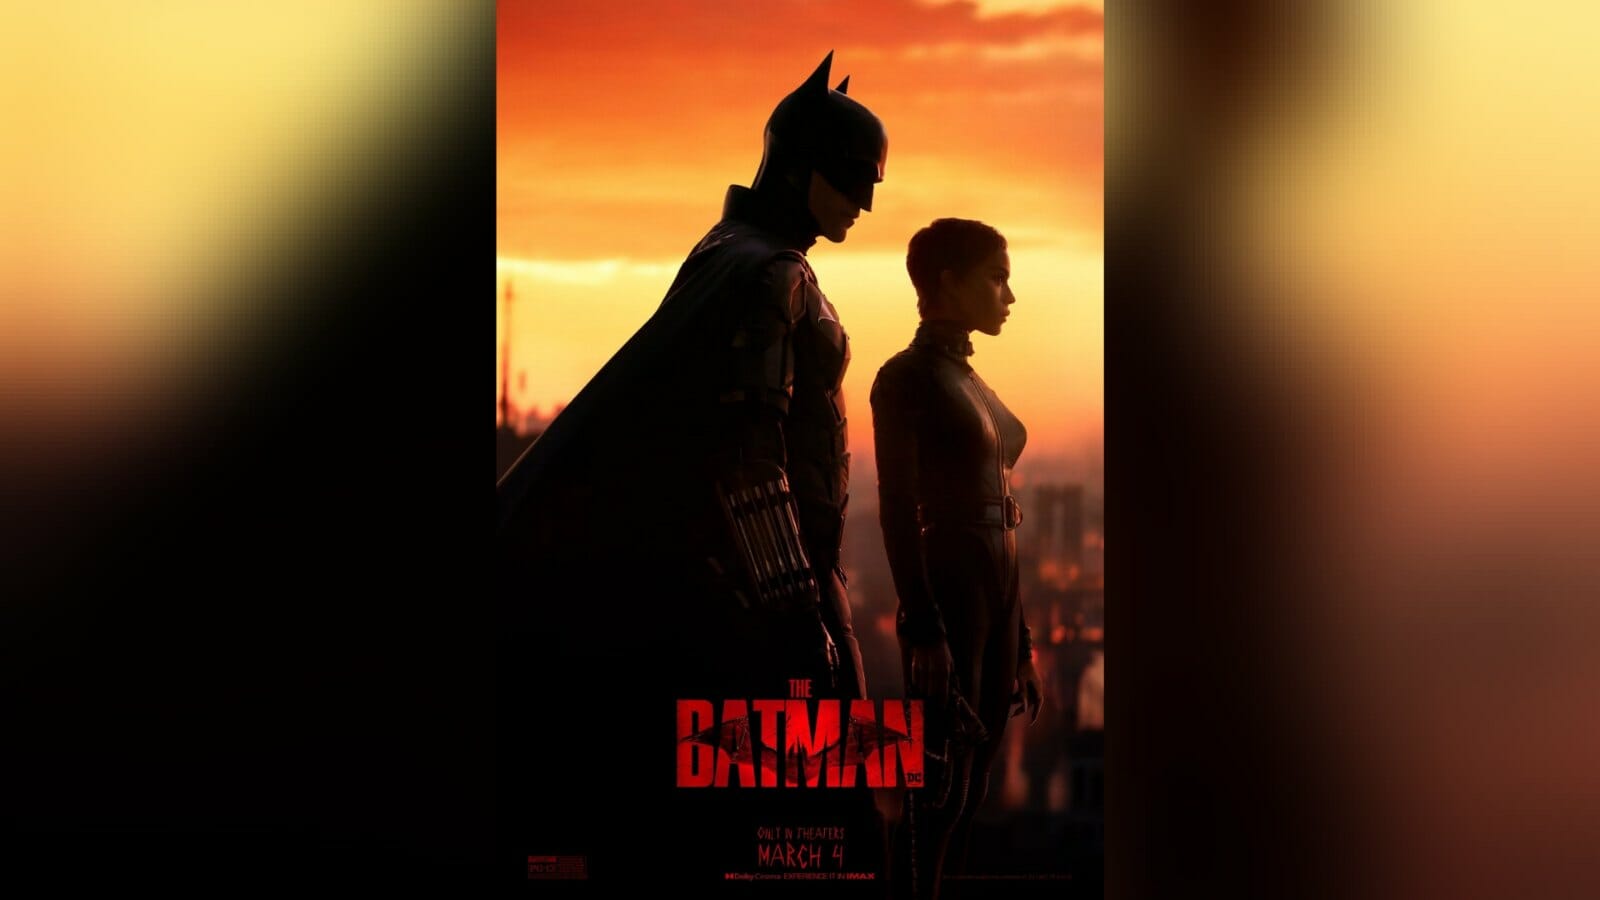 Second released poster of The Batman